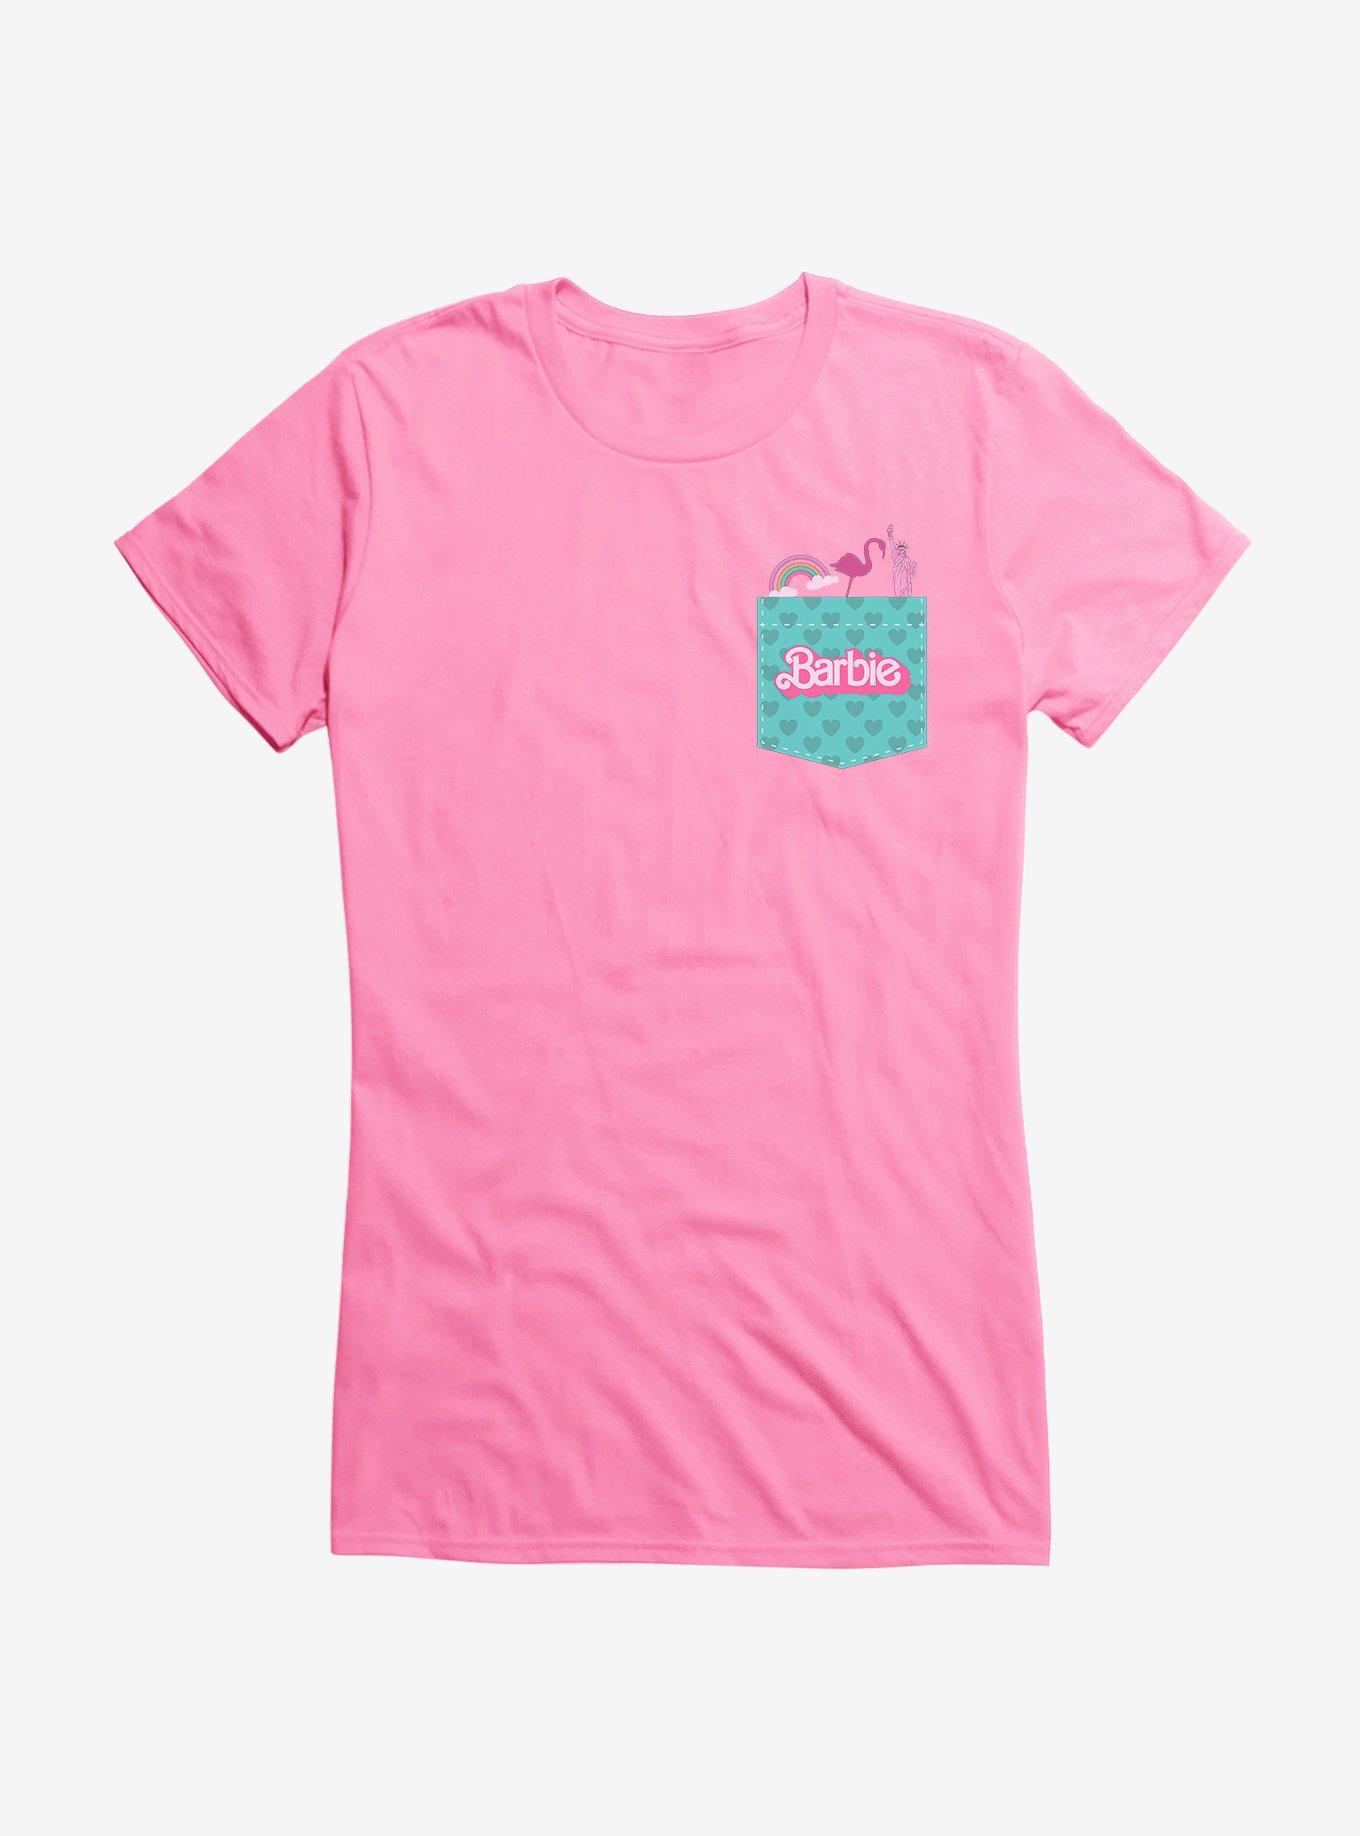 Barbie The Movie Pocket Graphic Girls T-Shirt, CHARITY PINK, hi-res